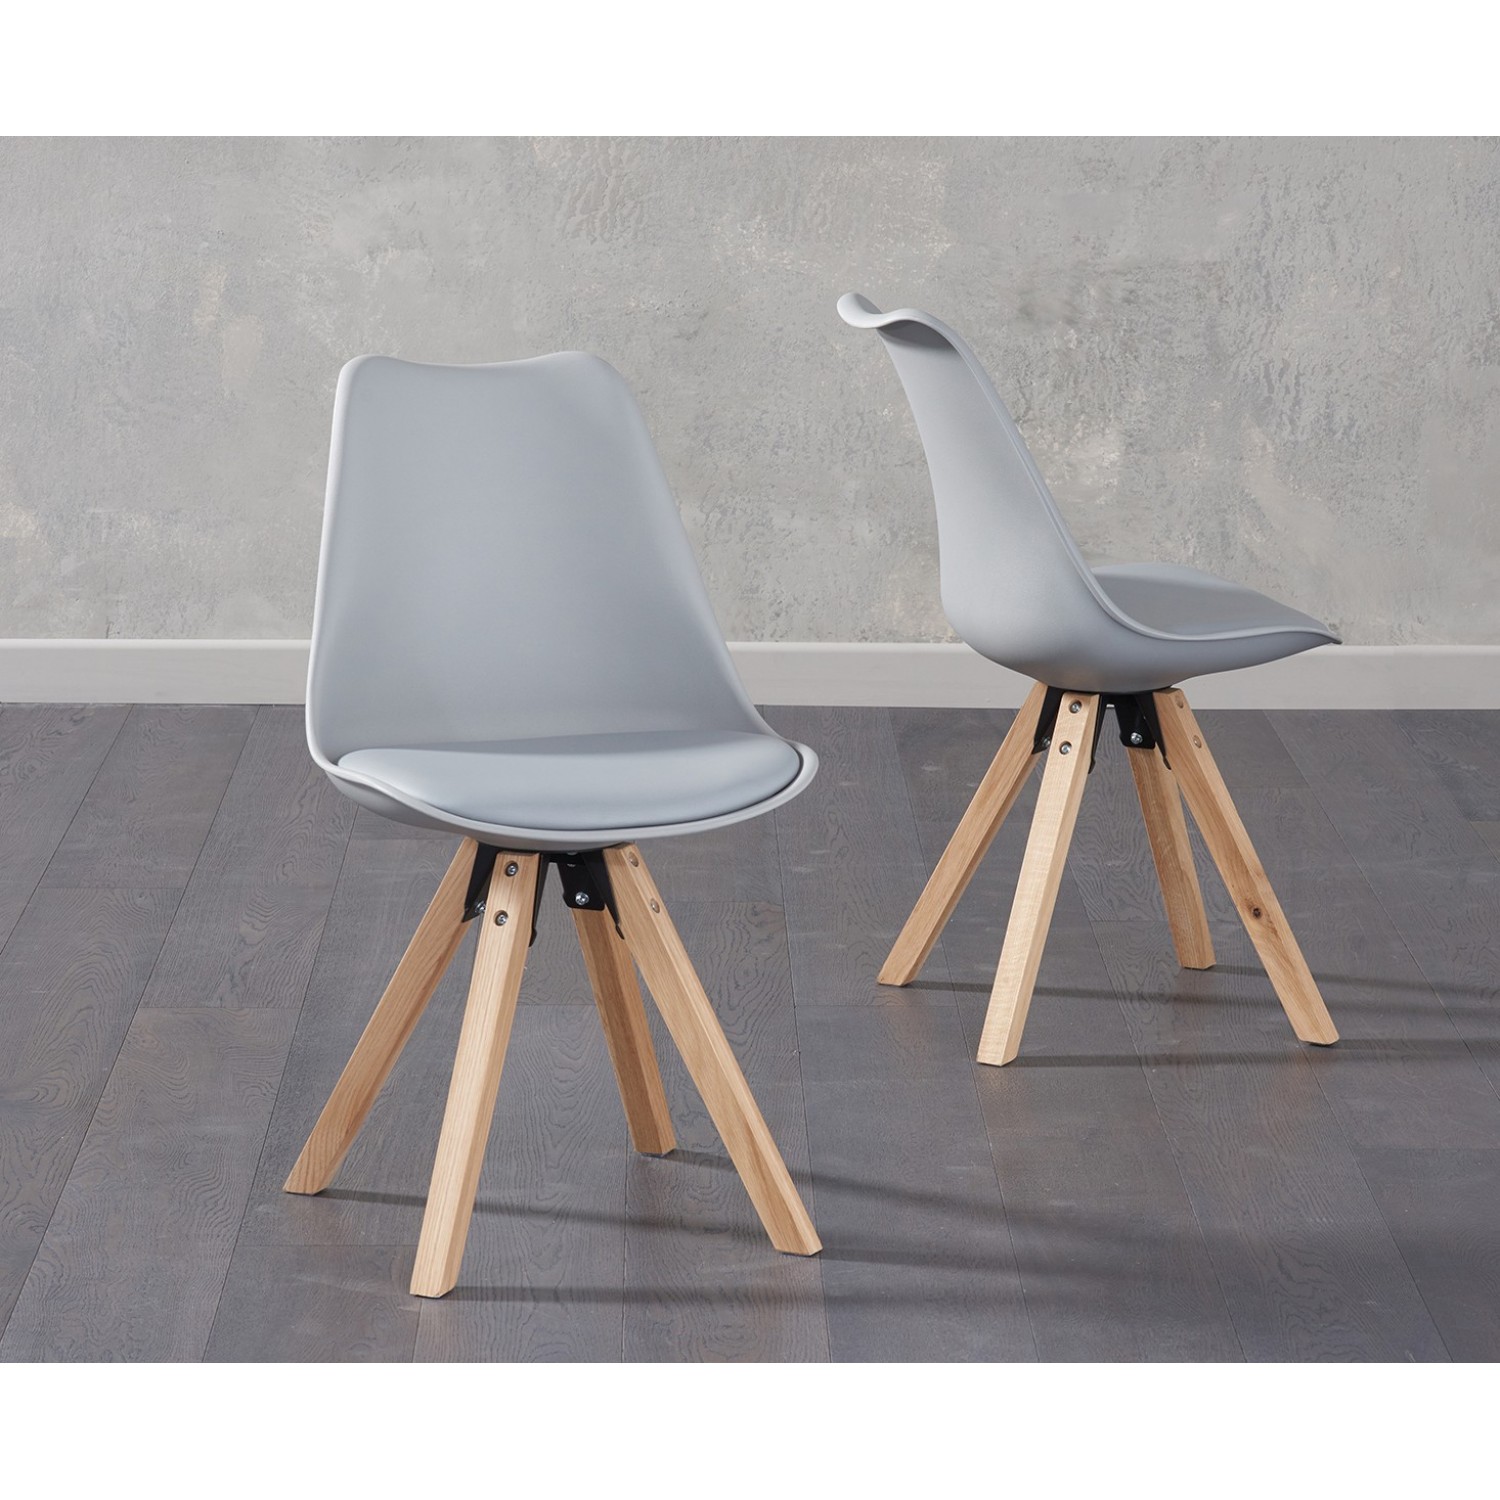 Olivier Square Wooden Leg Light Grey, Grey Leather Dining Chairs Wooden Legs